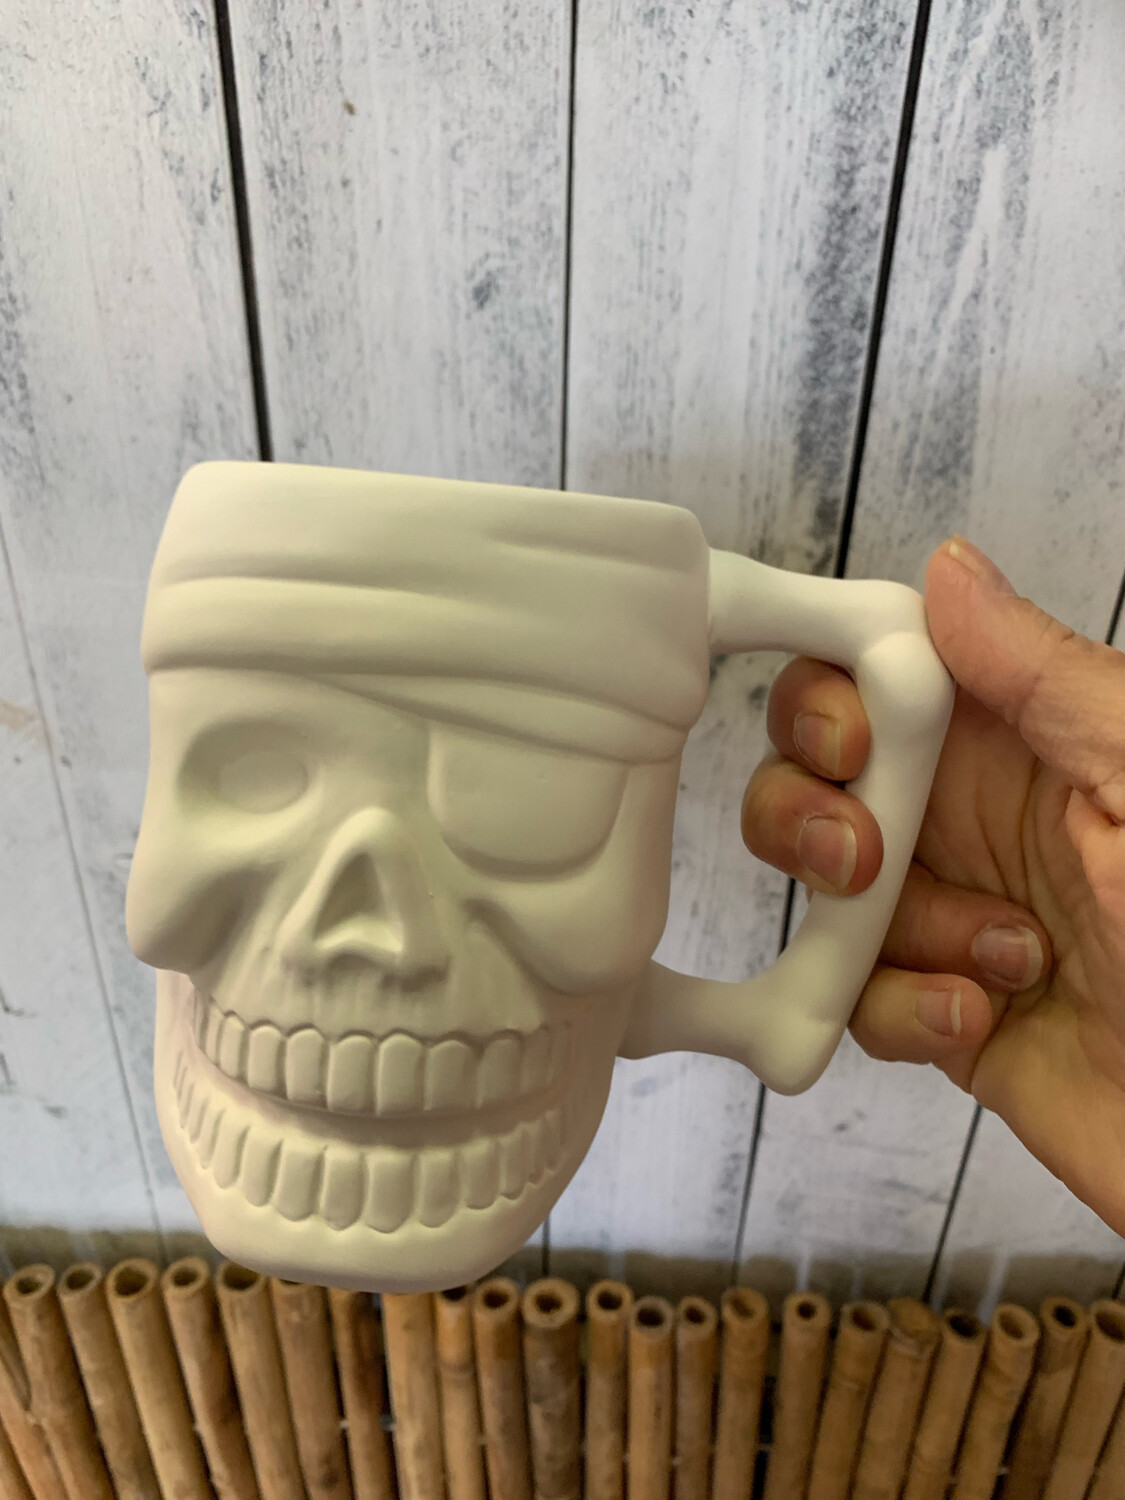 Paint Your Own Pottery - Ceramic 16 Ounce Pirate Skull Mug Painting Kit